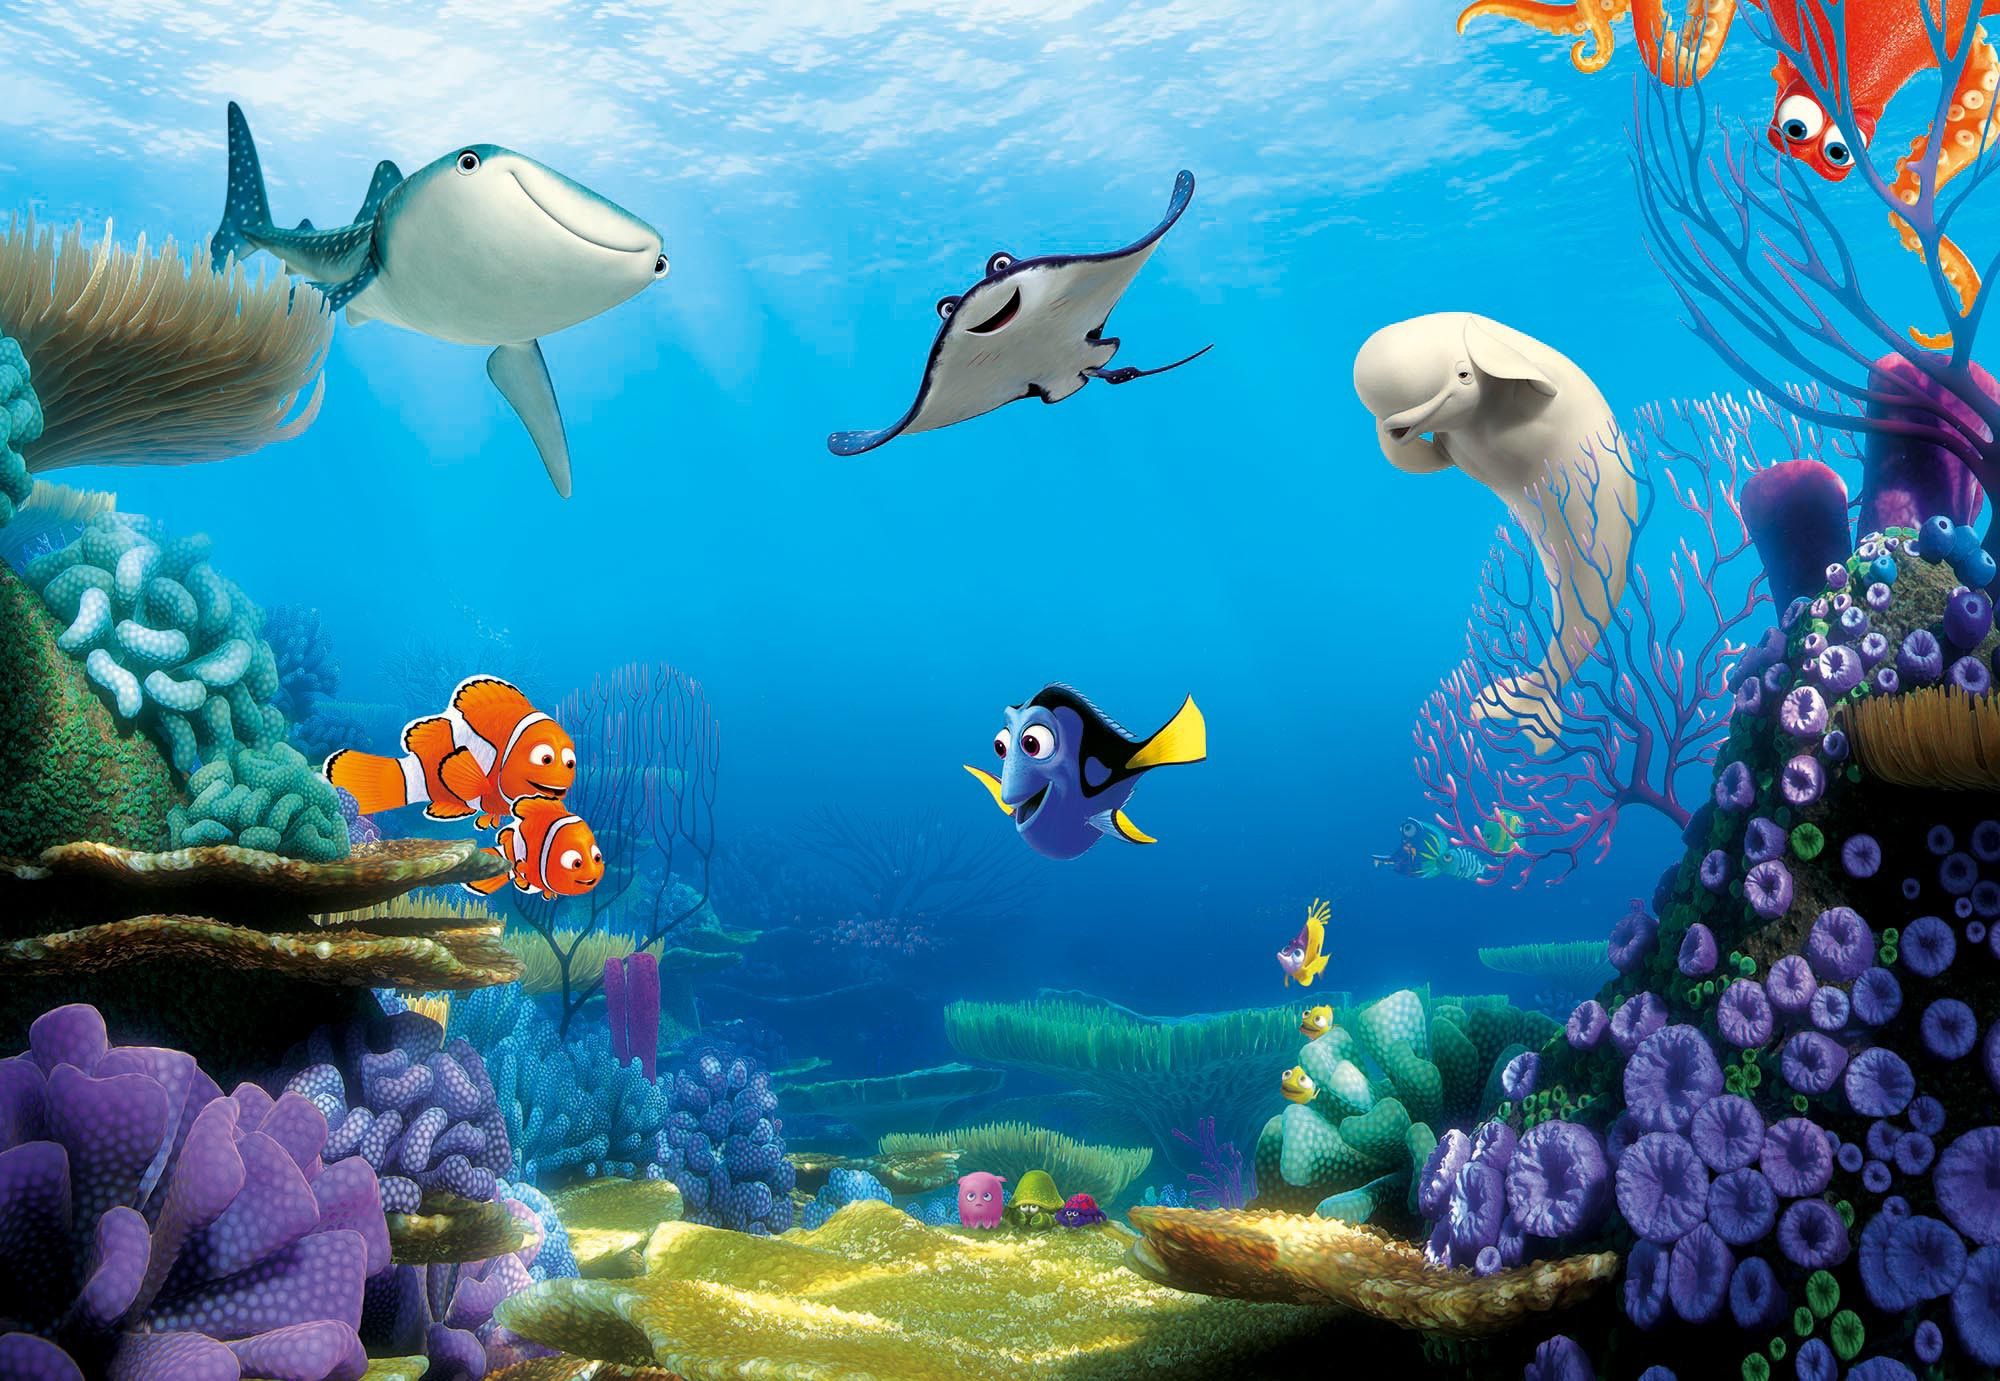 Finding Dory Background